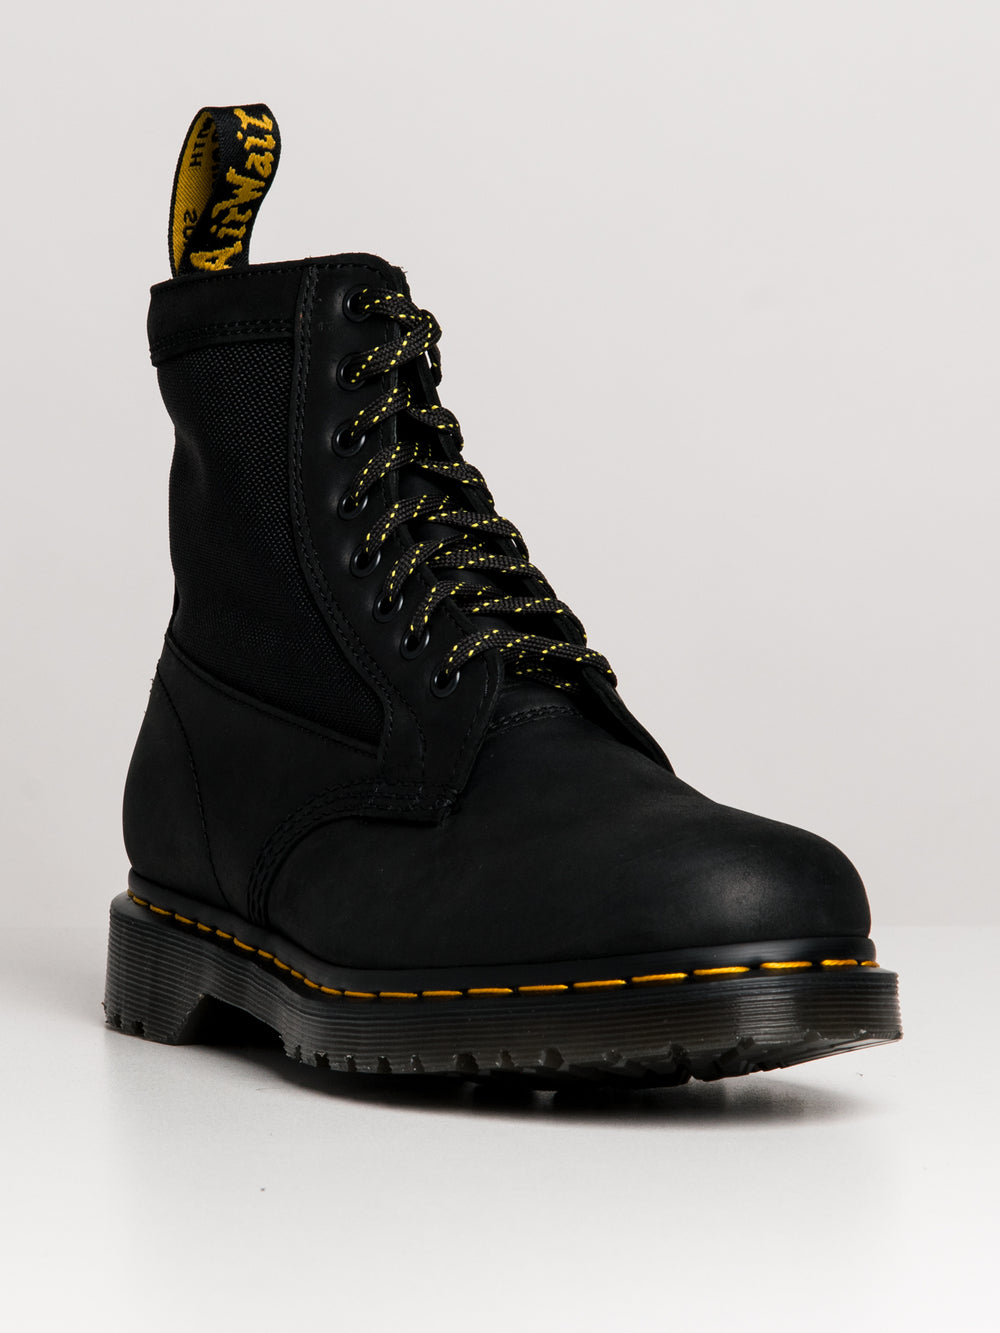 DR MARTENS 1460 PANEL STREETER BOOT - CLEARANCE